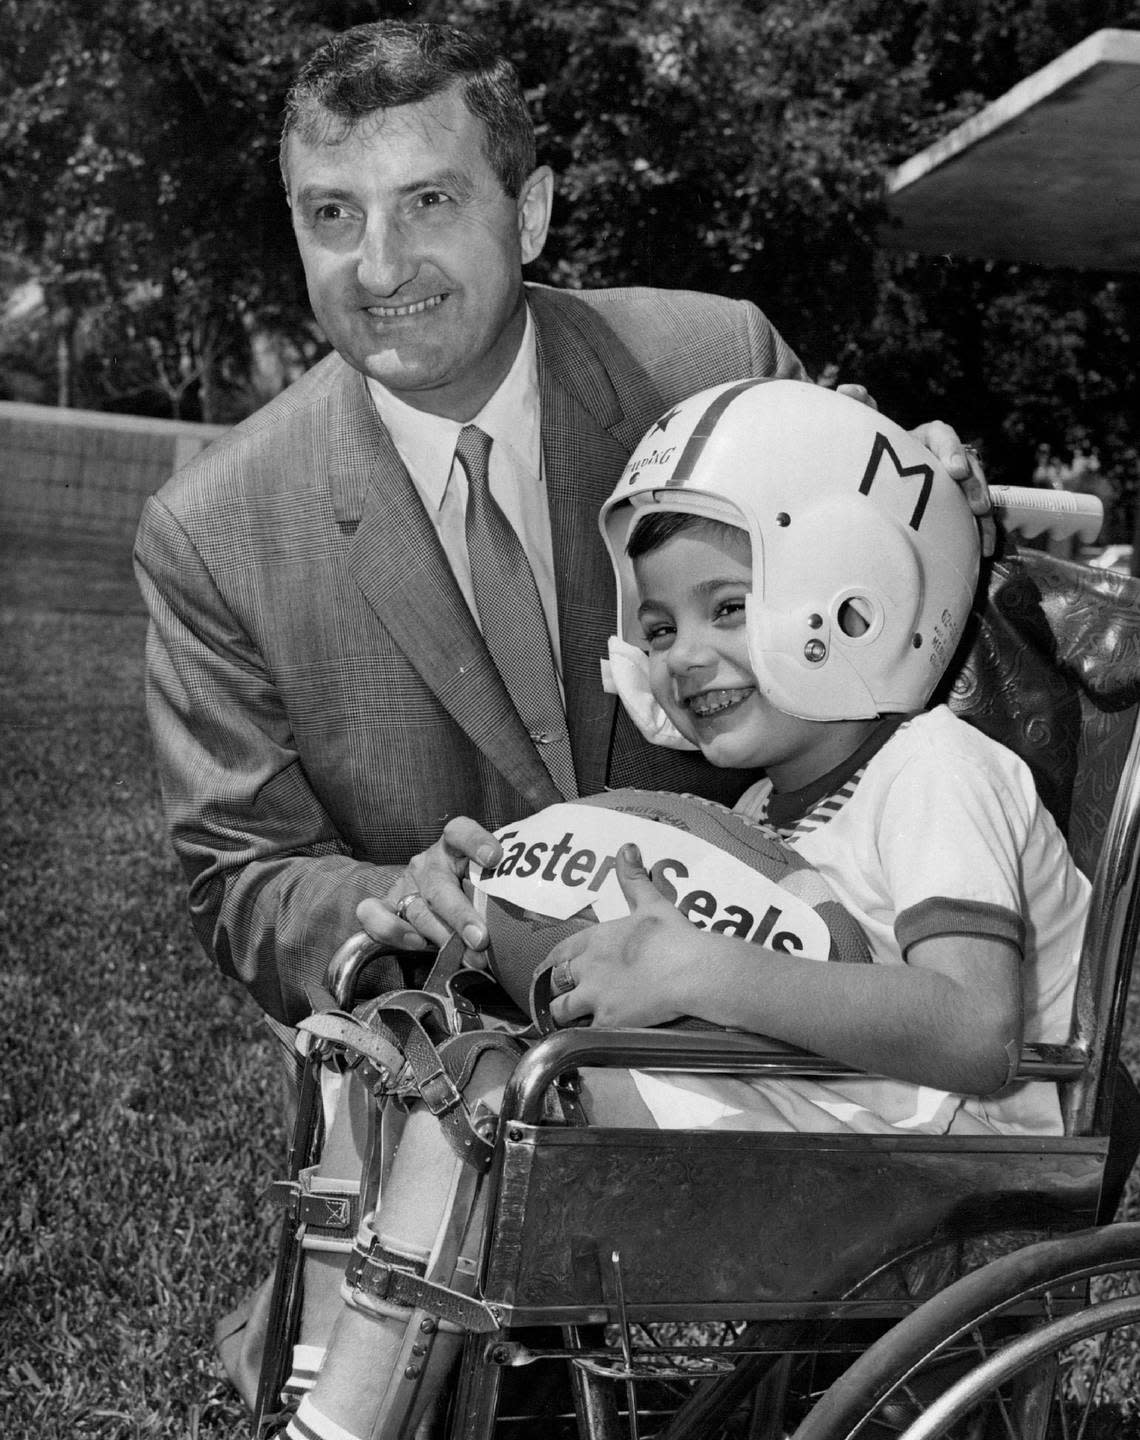 Four-year-old Cory Proudfoot, Miami-Dade’s Easter Seal poster child, gets encouragement from Miami Dolphins owner Joe Robbie in 1966, the team’s inaugural year.